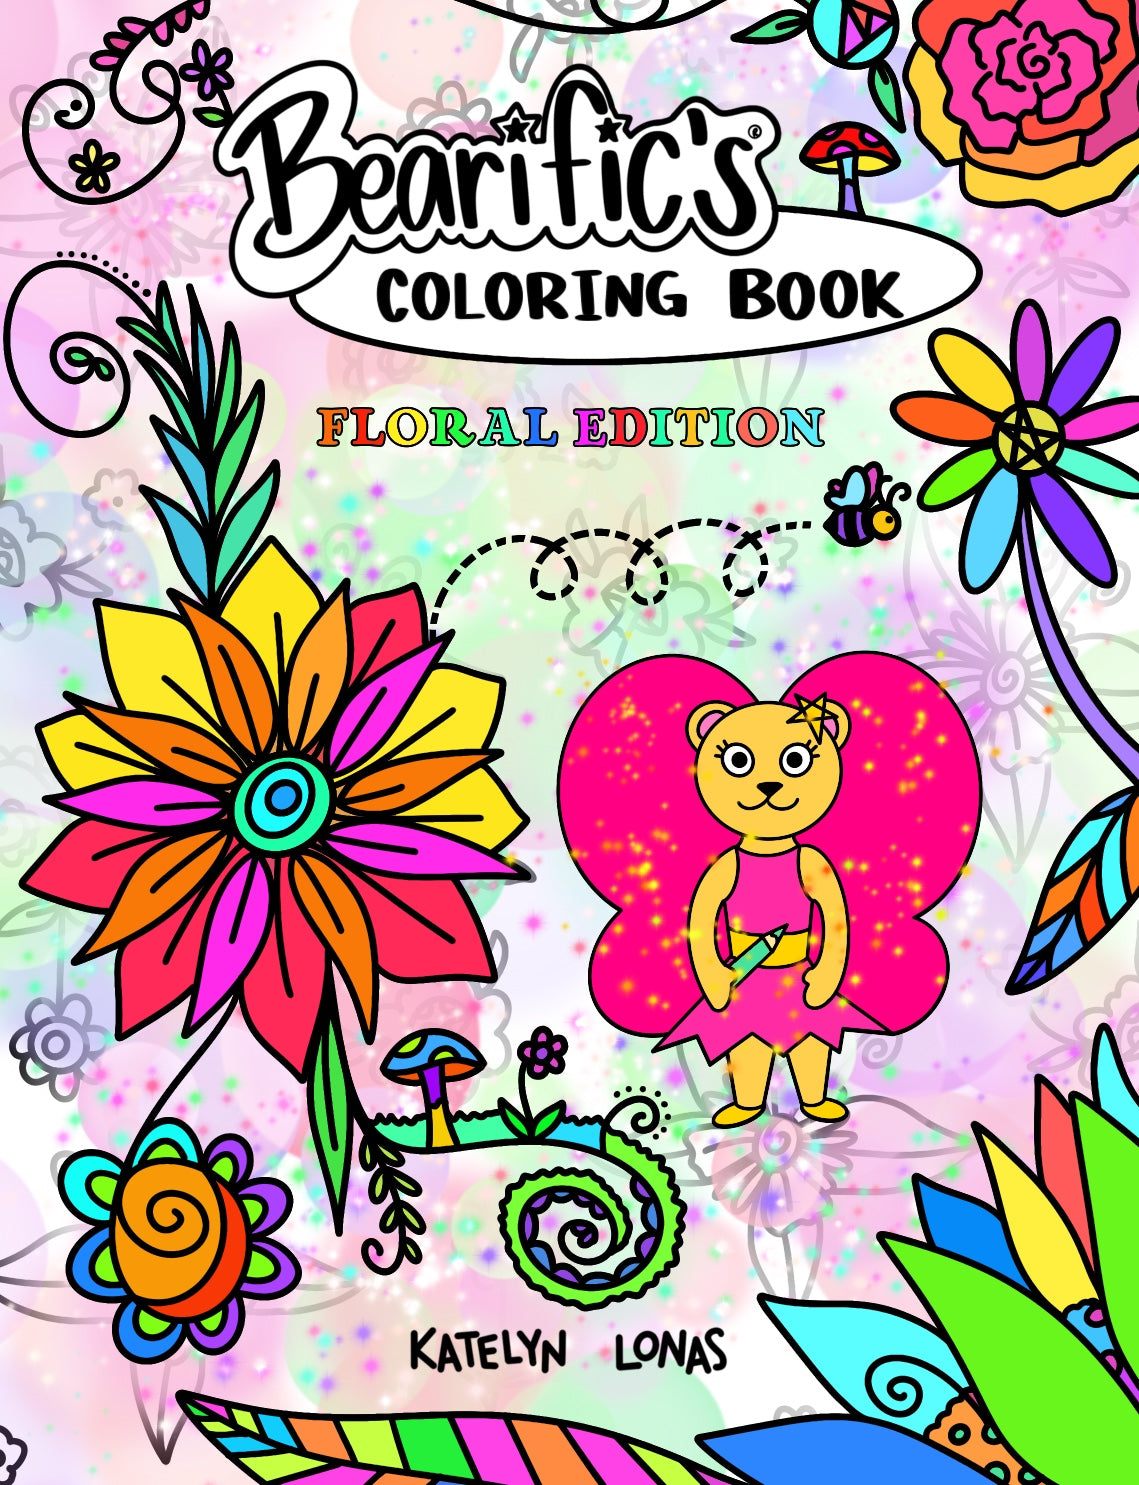 Bearific’s® Coloring Book: Floral Edition